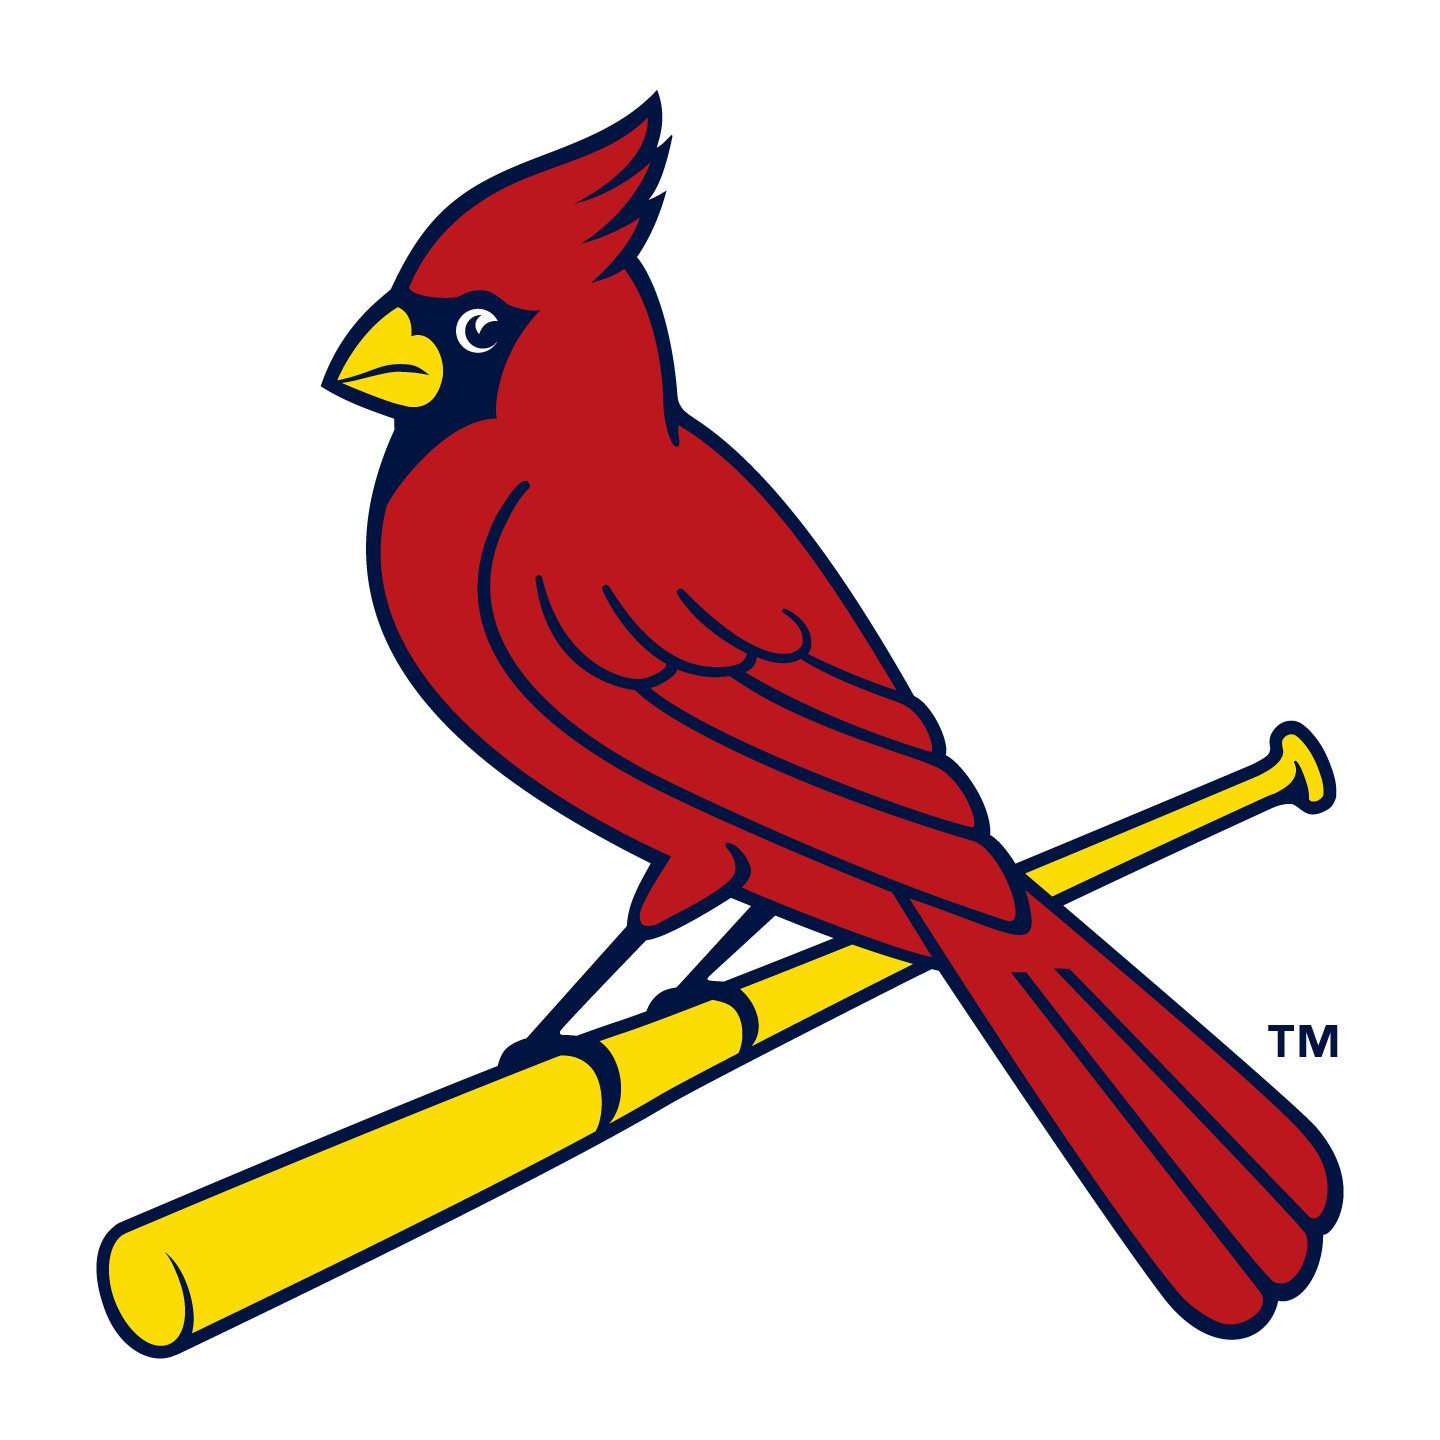 Fubo Announces Marketing Partnership With the St. Louis Cardinals